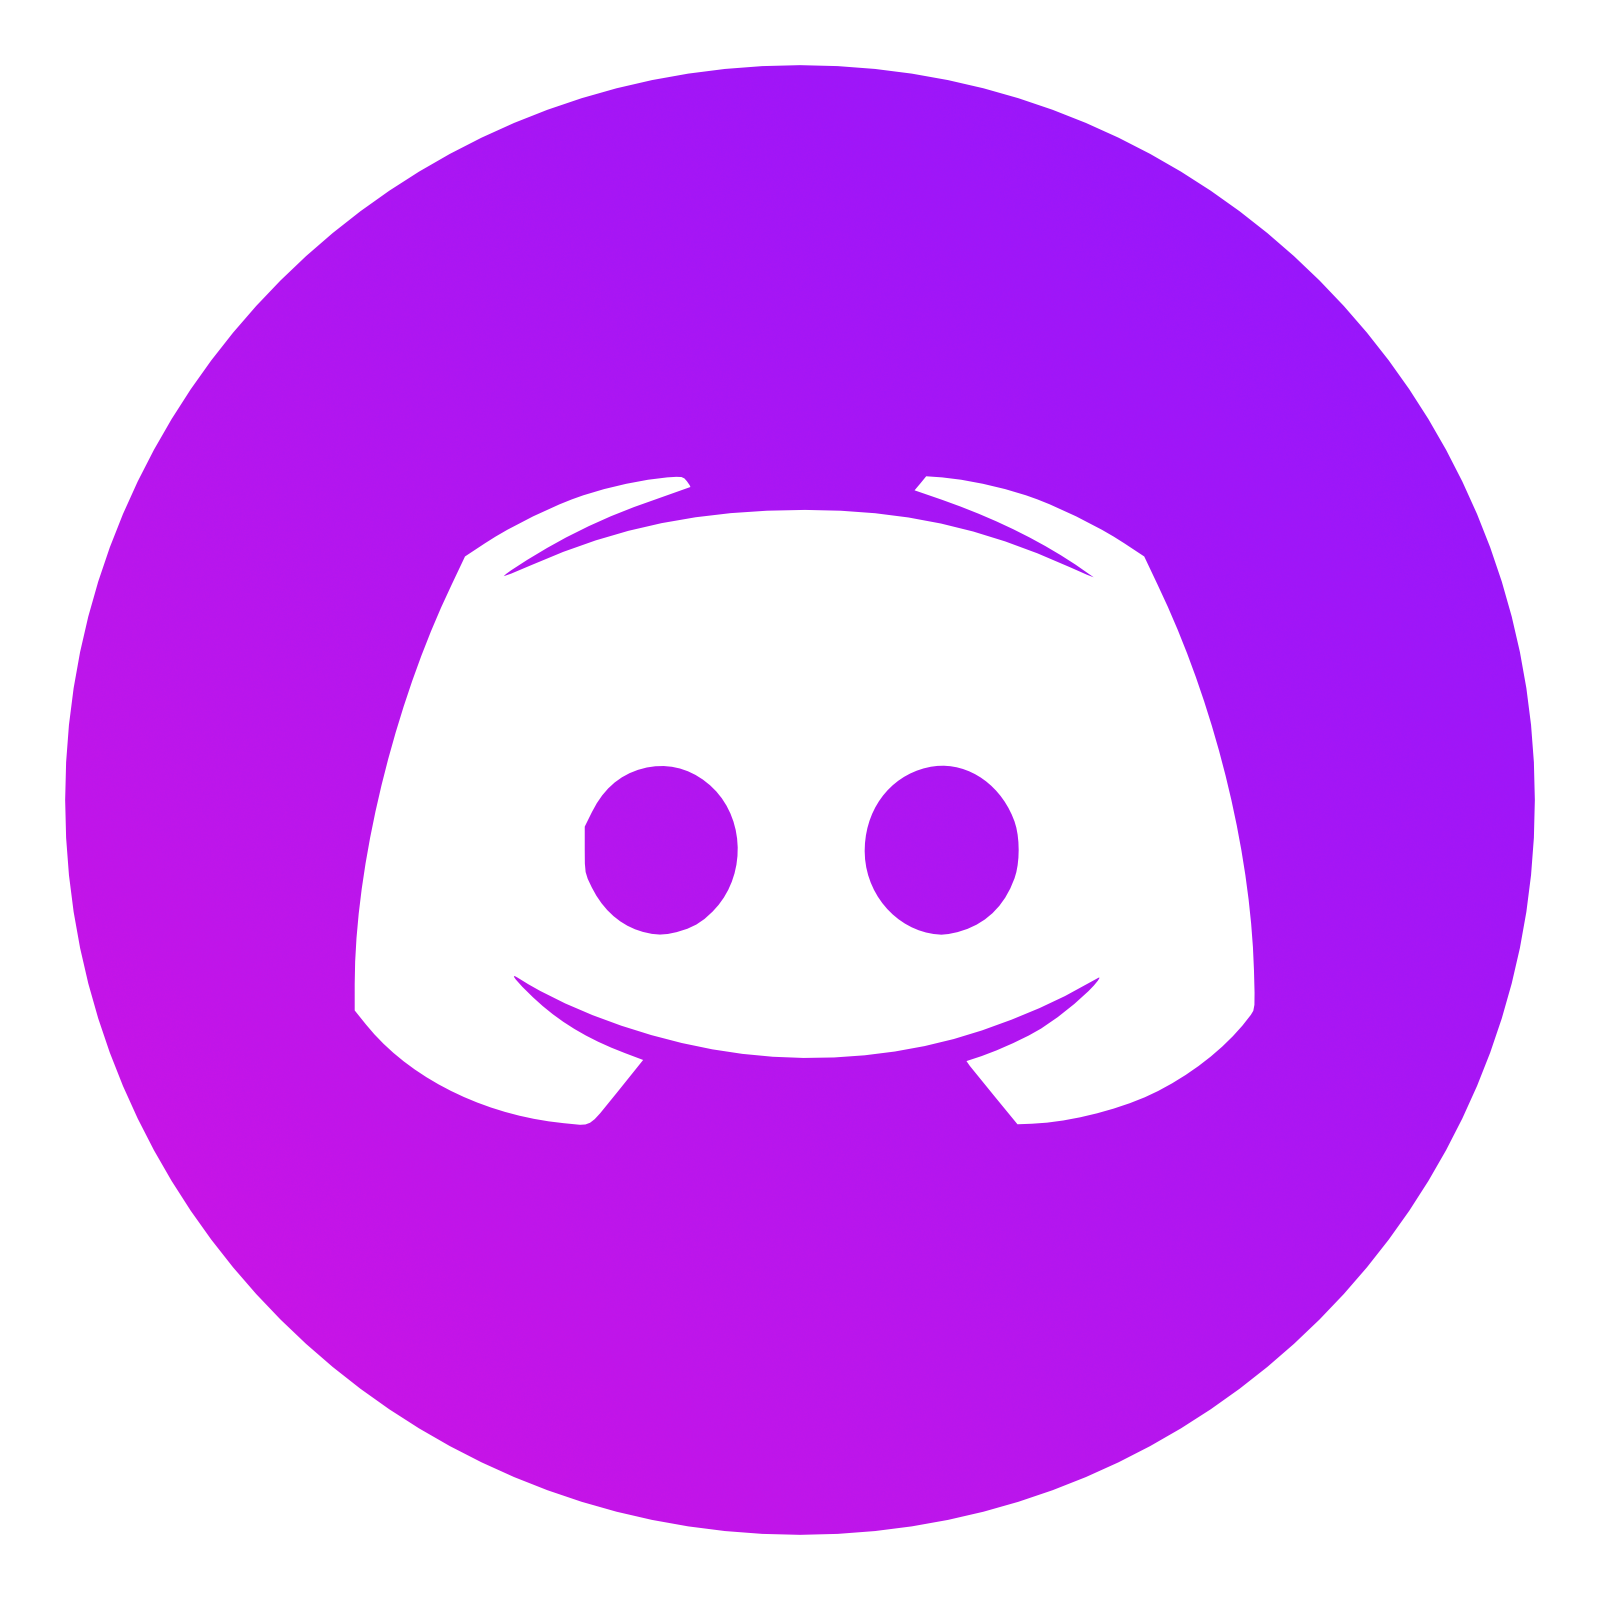 Image discord hosted in Lensdump.